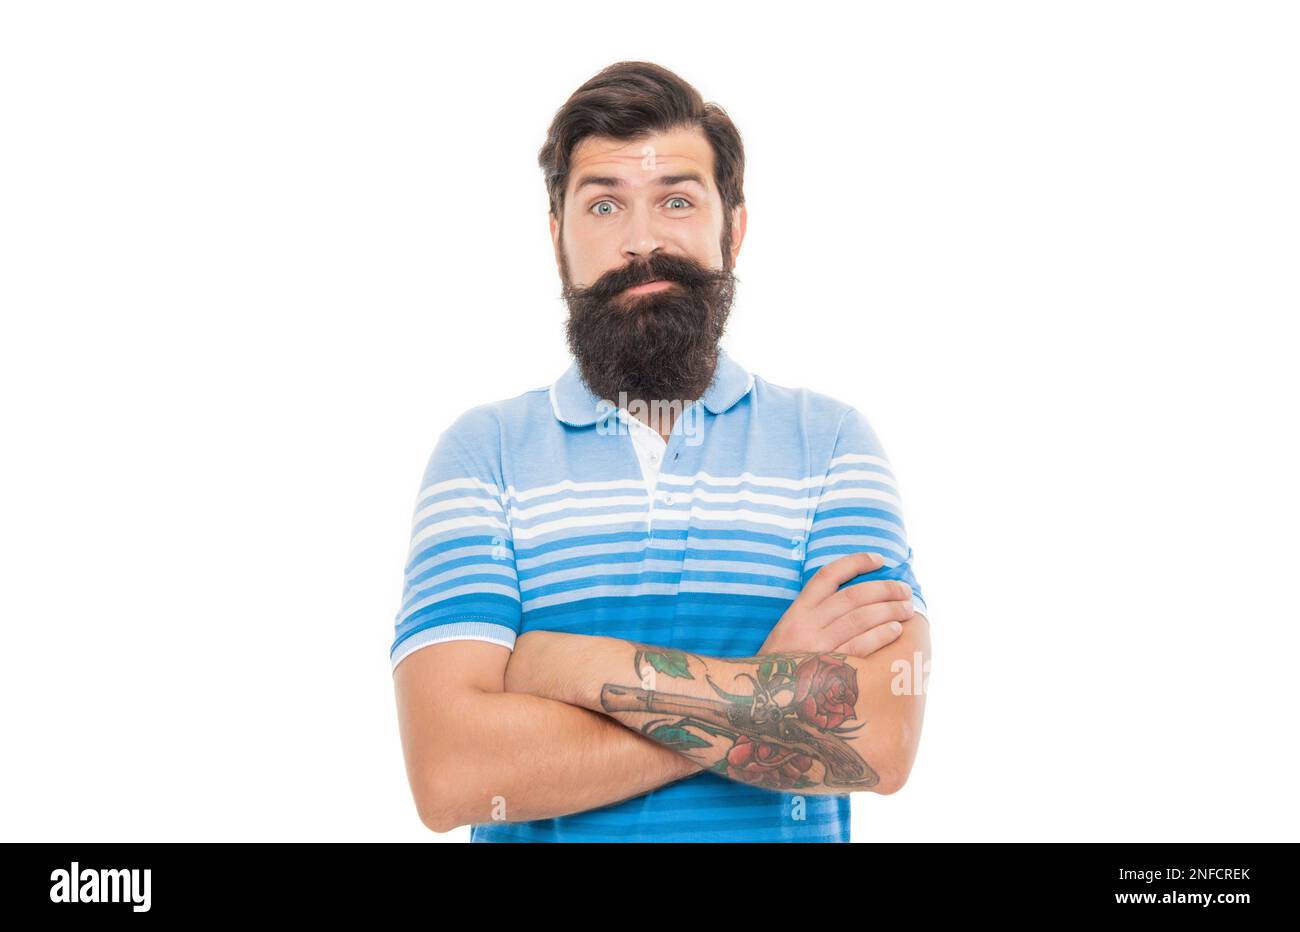 Bearded man in doubt. Doubtful man raising brows. Unshaven man keeping arms crossed Stock Photo